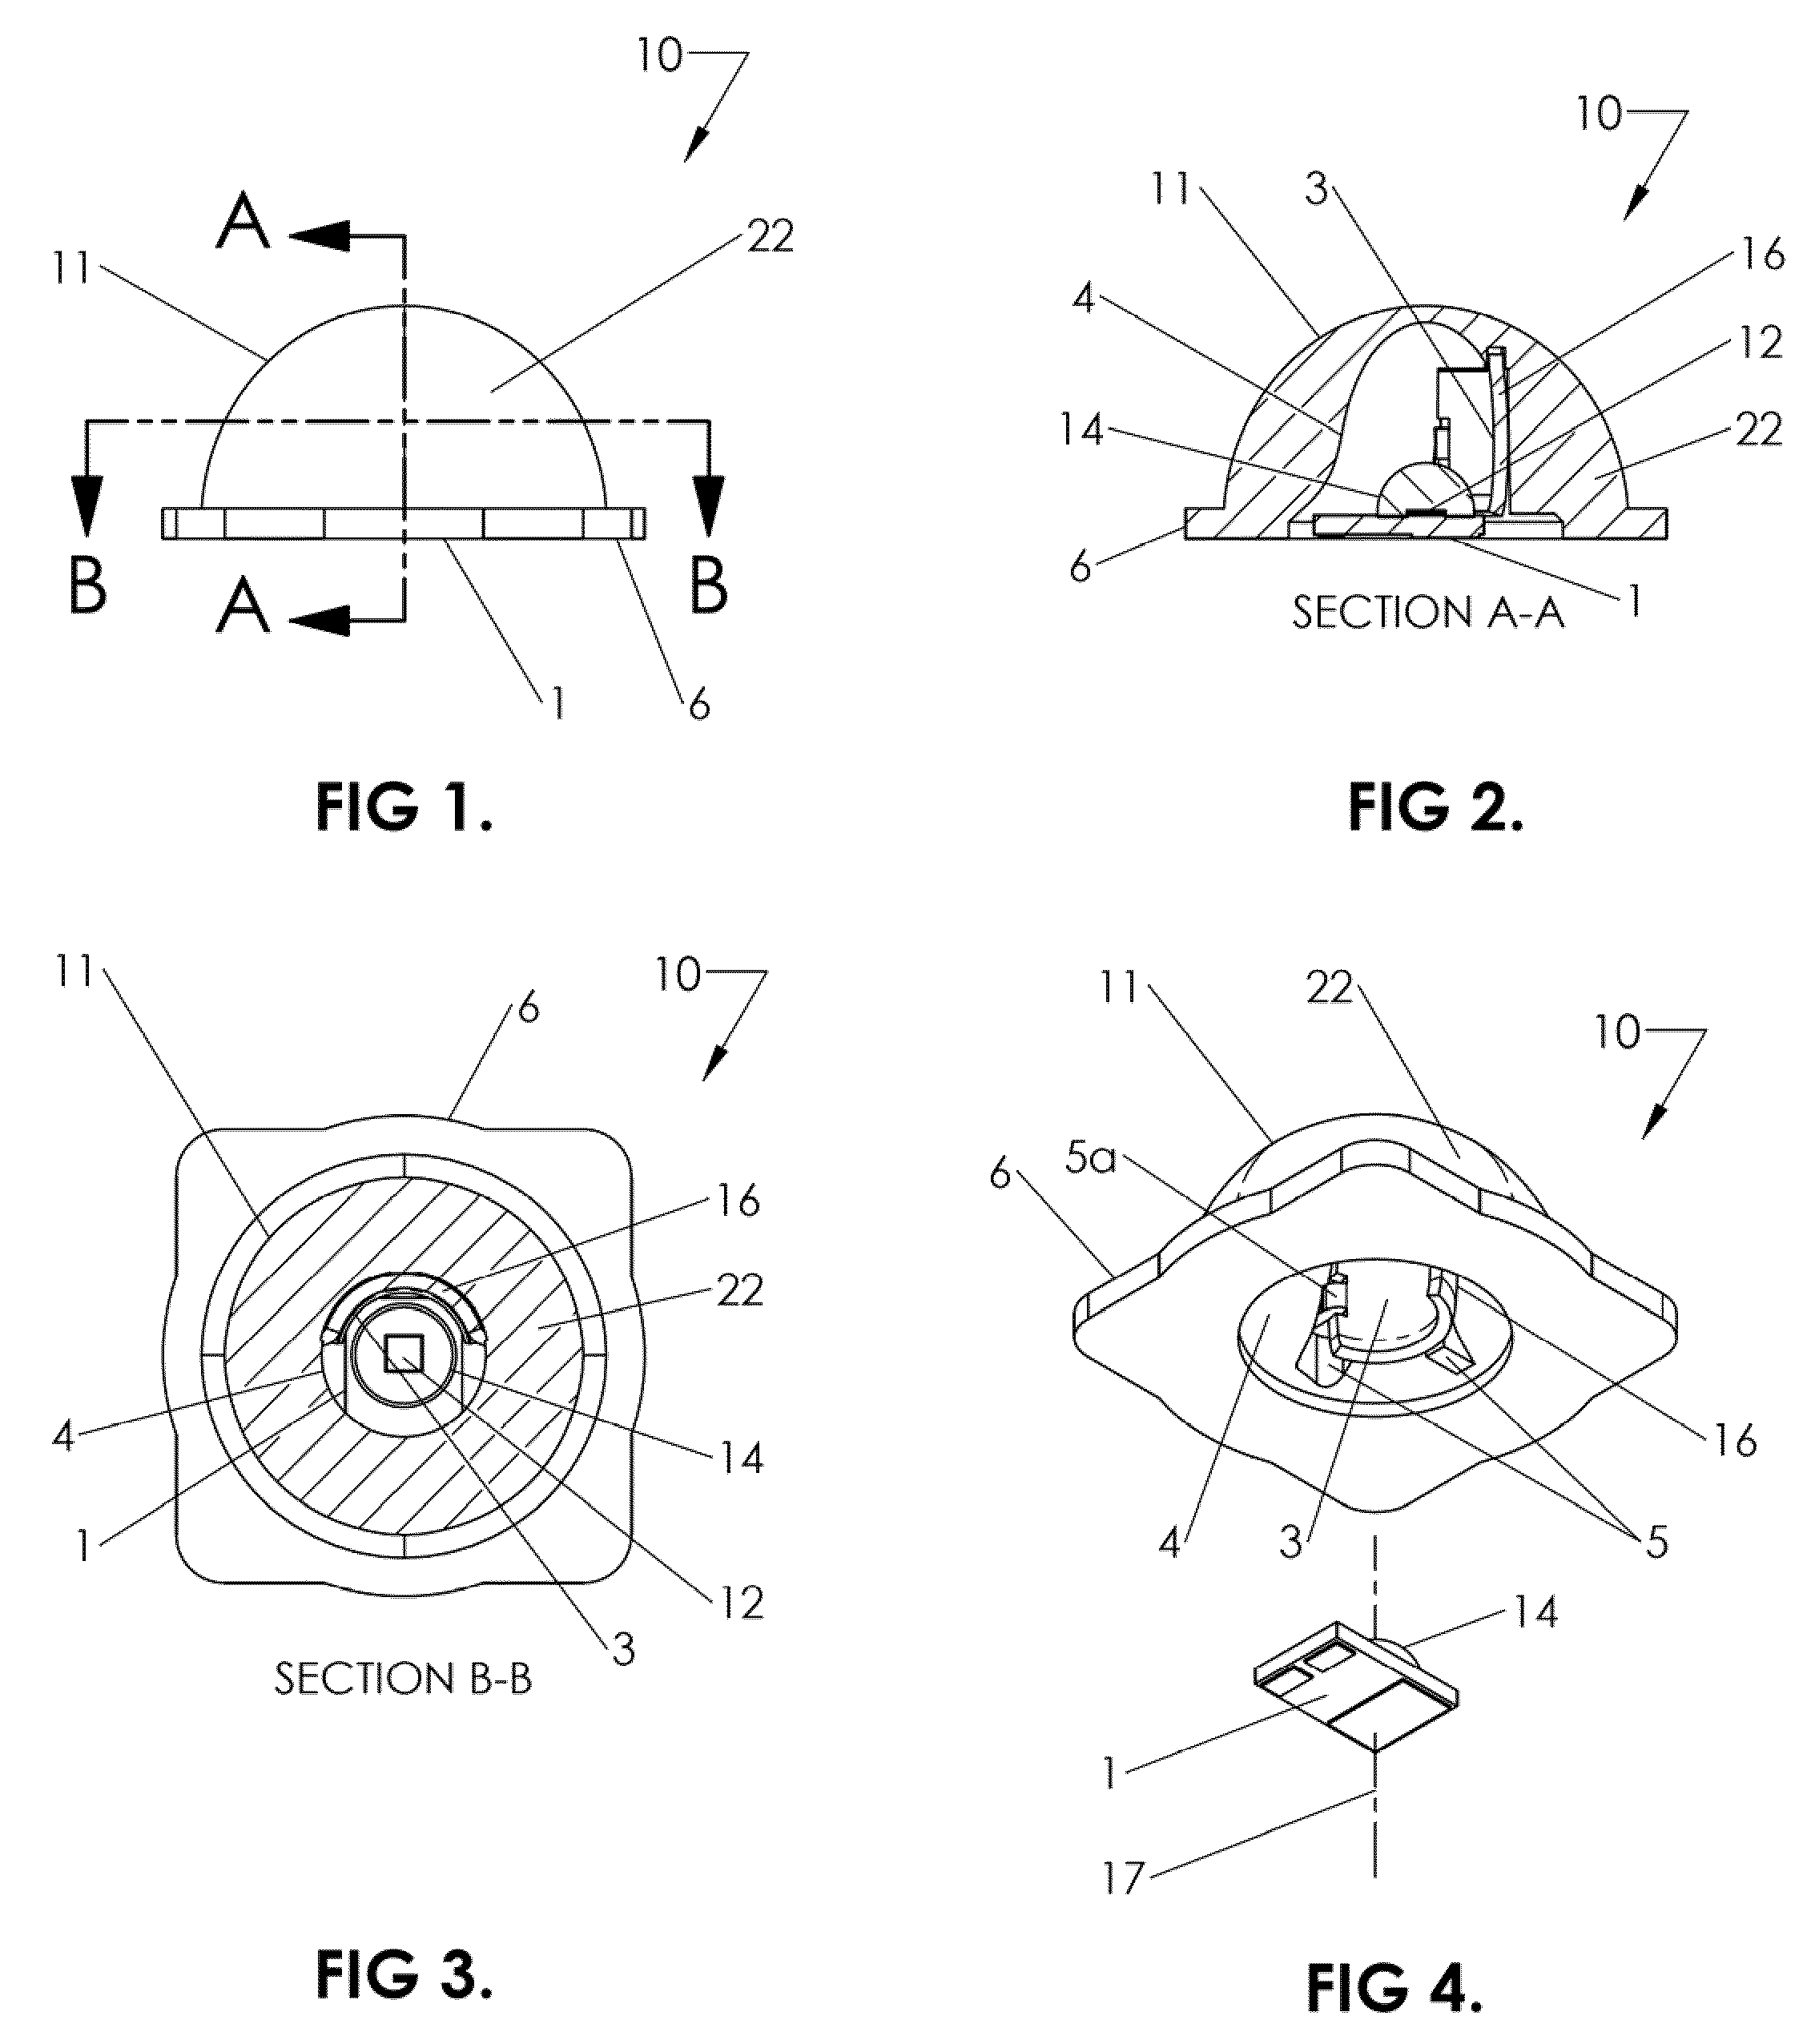 LED devices for offset wide beam generation